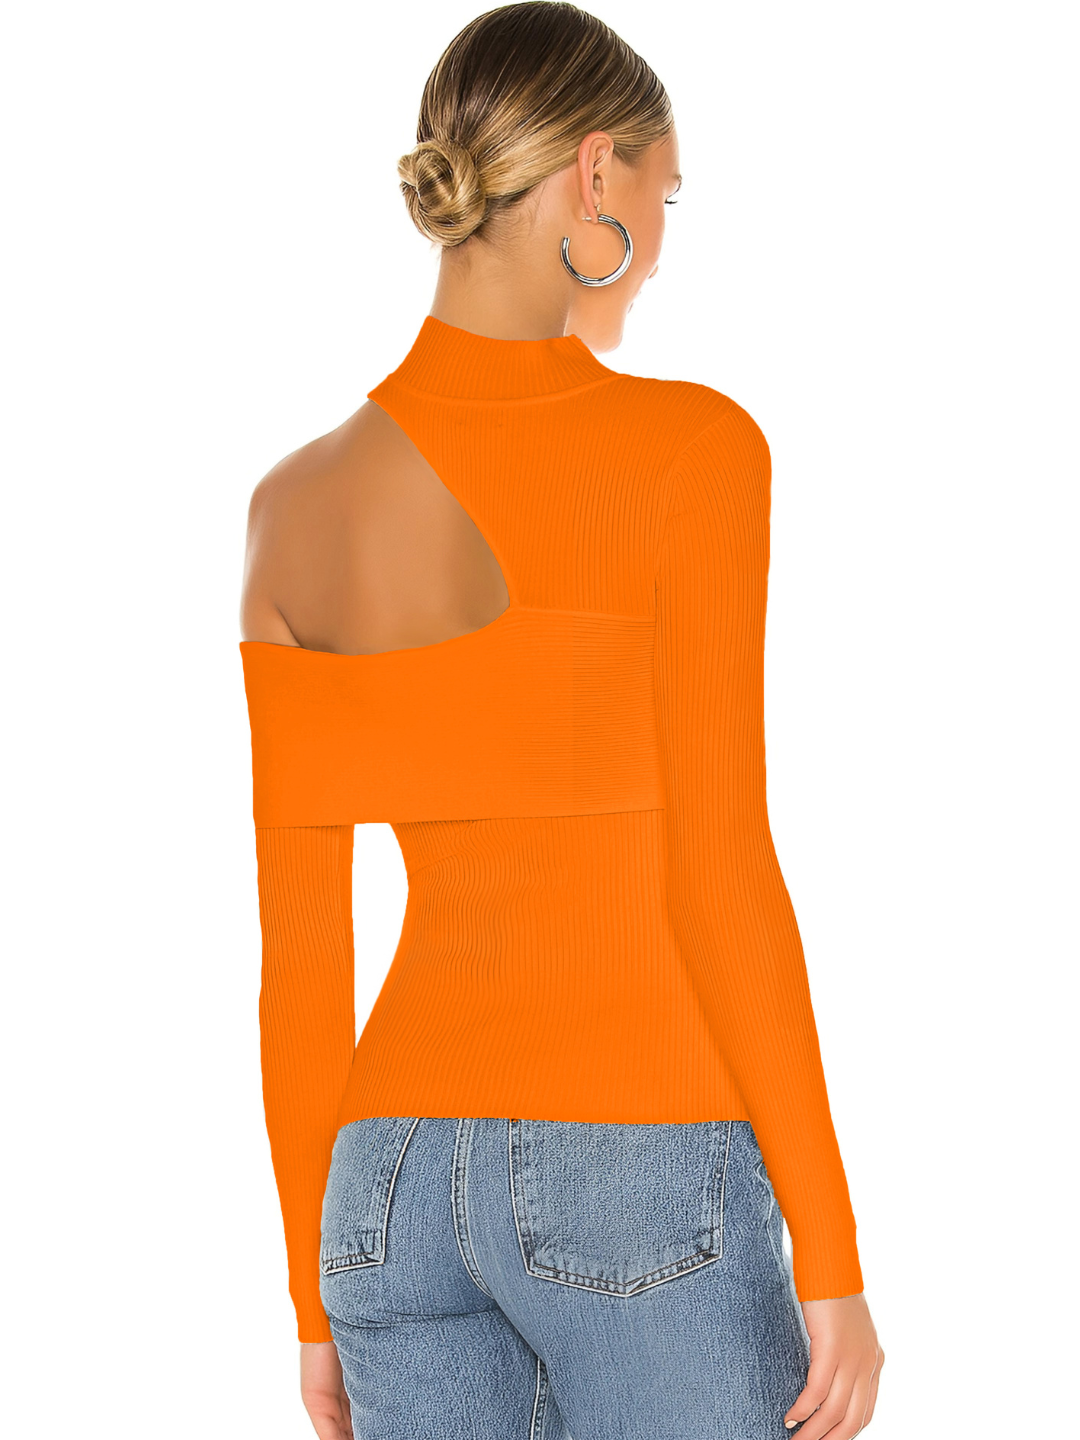 Stretchable Ribbed Bandage Top - Uptownie